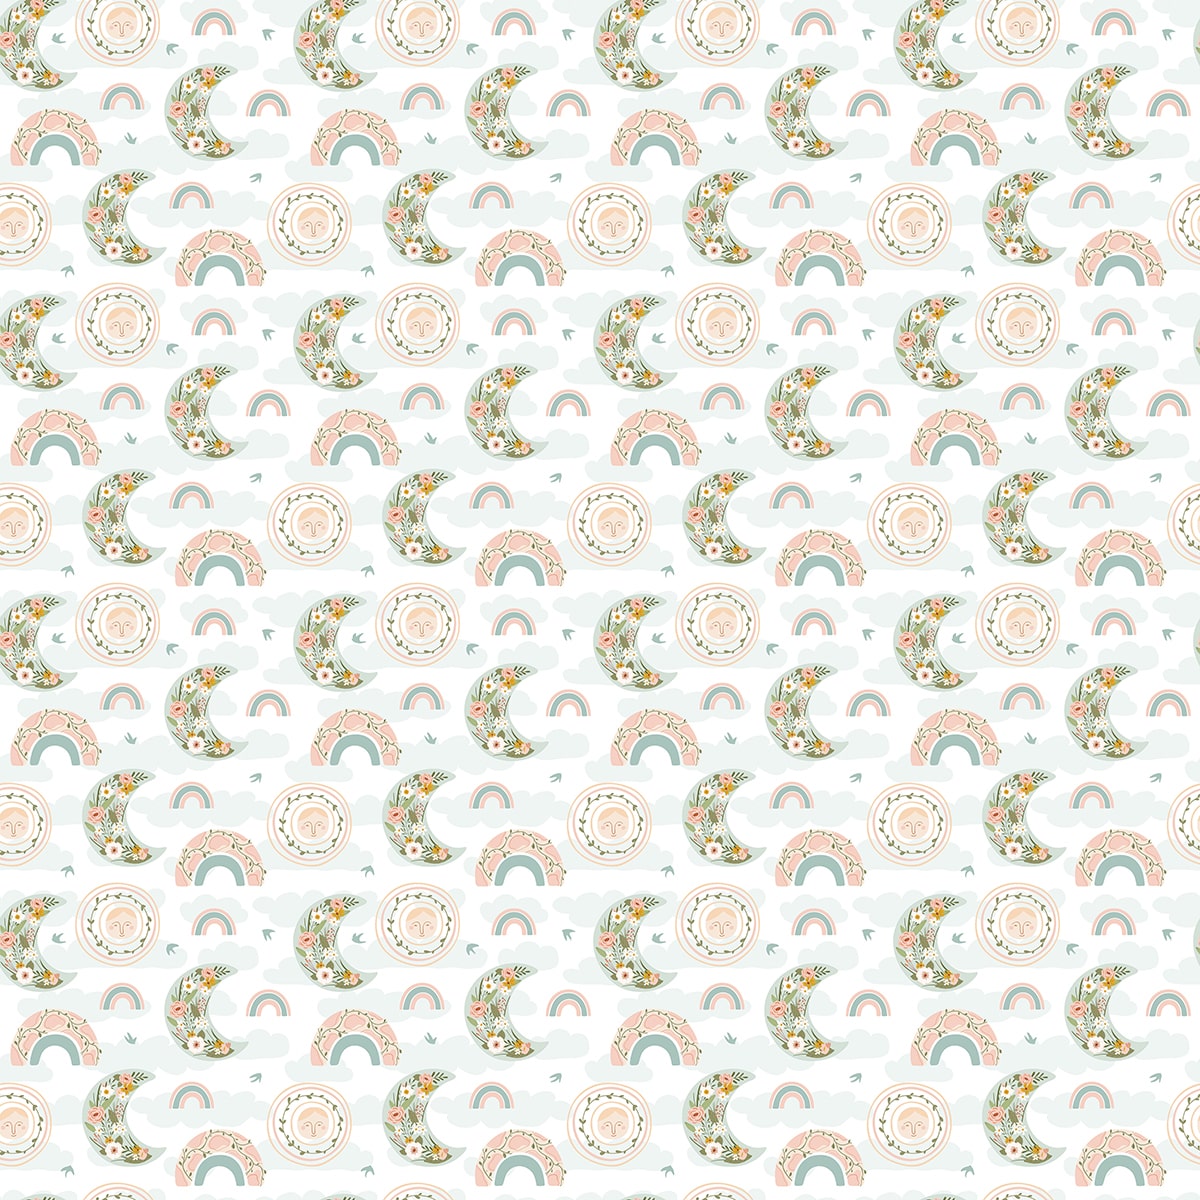 A pattern of flowers and rainbows